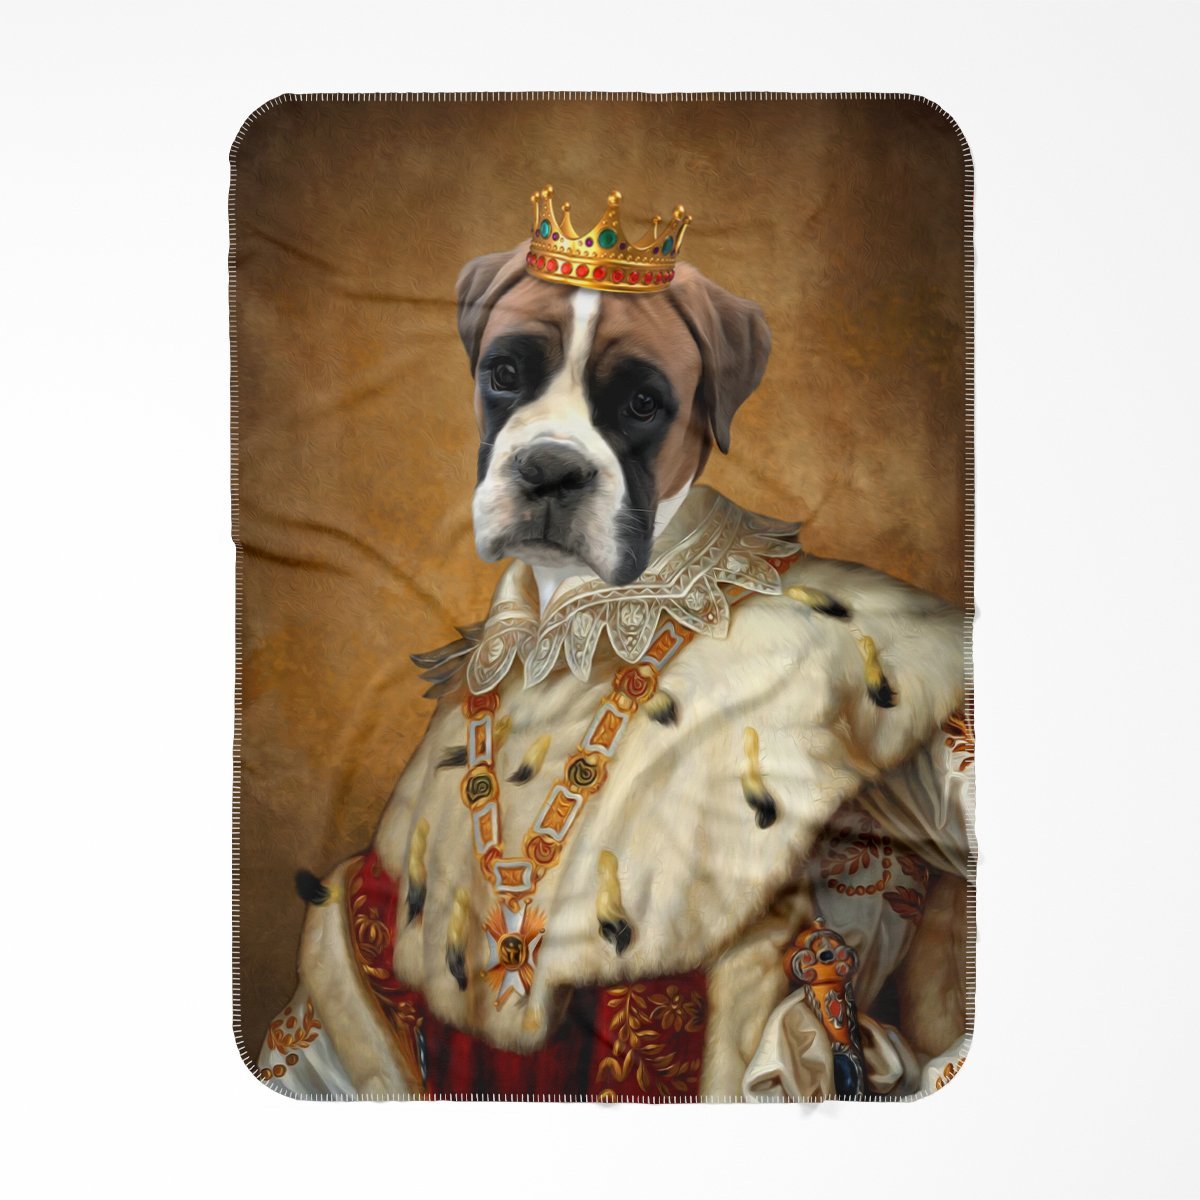 His Majesty: Custom Pet Blanket - Paw & Glory - #pet portraits# - #dog portraits# - #pet portraits uk#Paw and glory, Pet portraits blanket,blankets with dog pictures on them, custom pup blanket, photo blanket dog, canvas dog blanket, your dog's face on a blanket